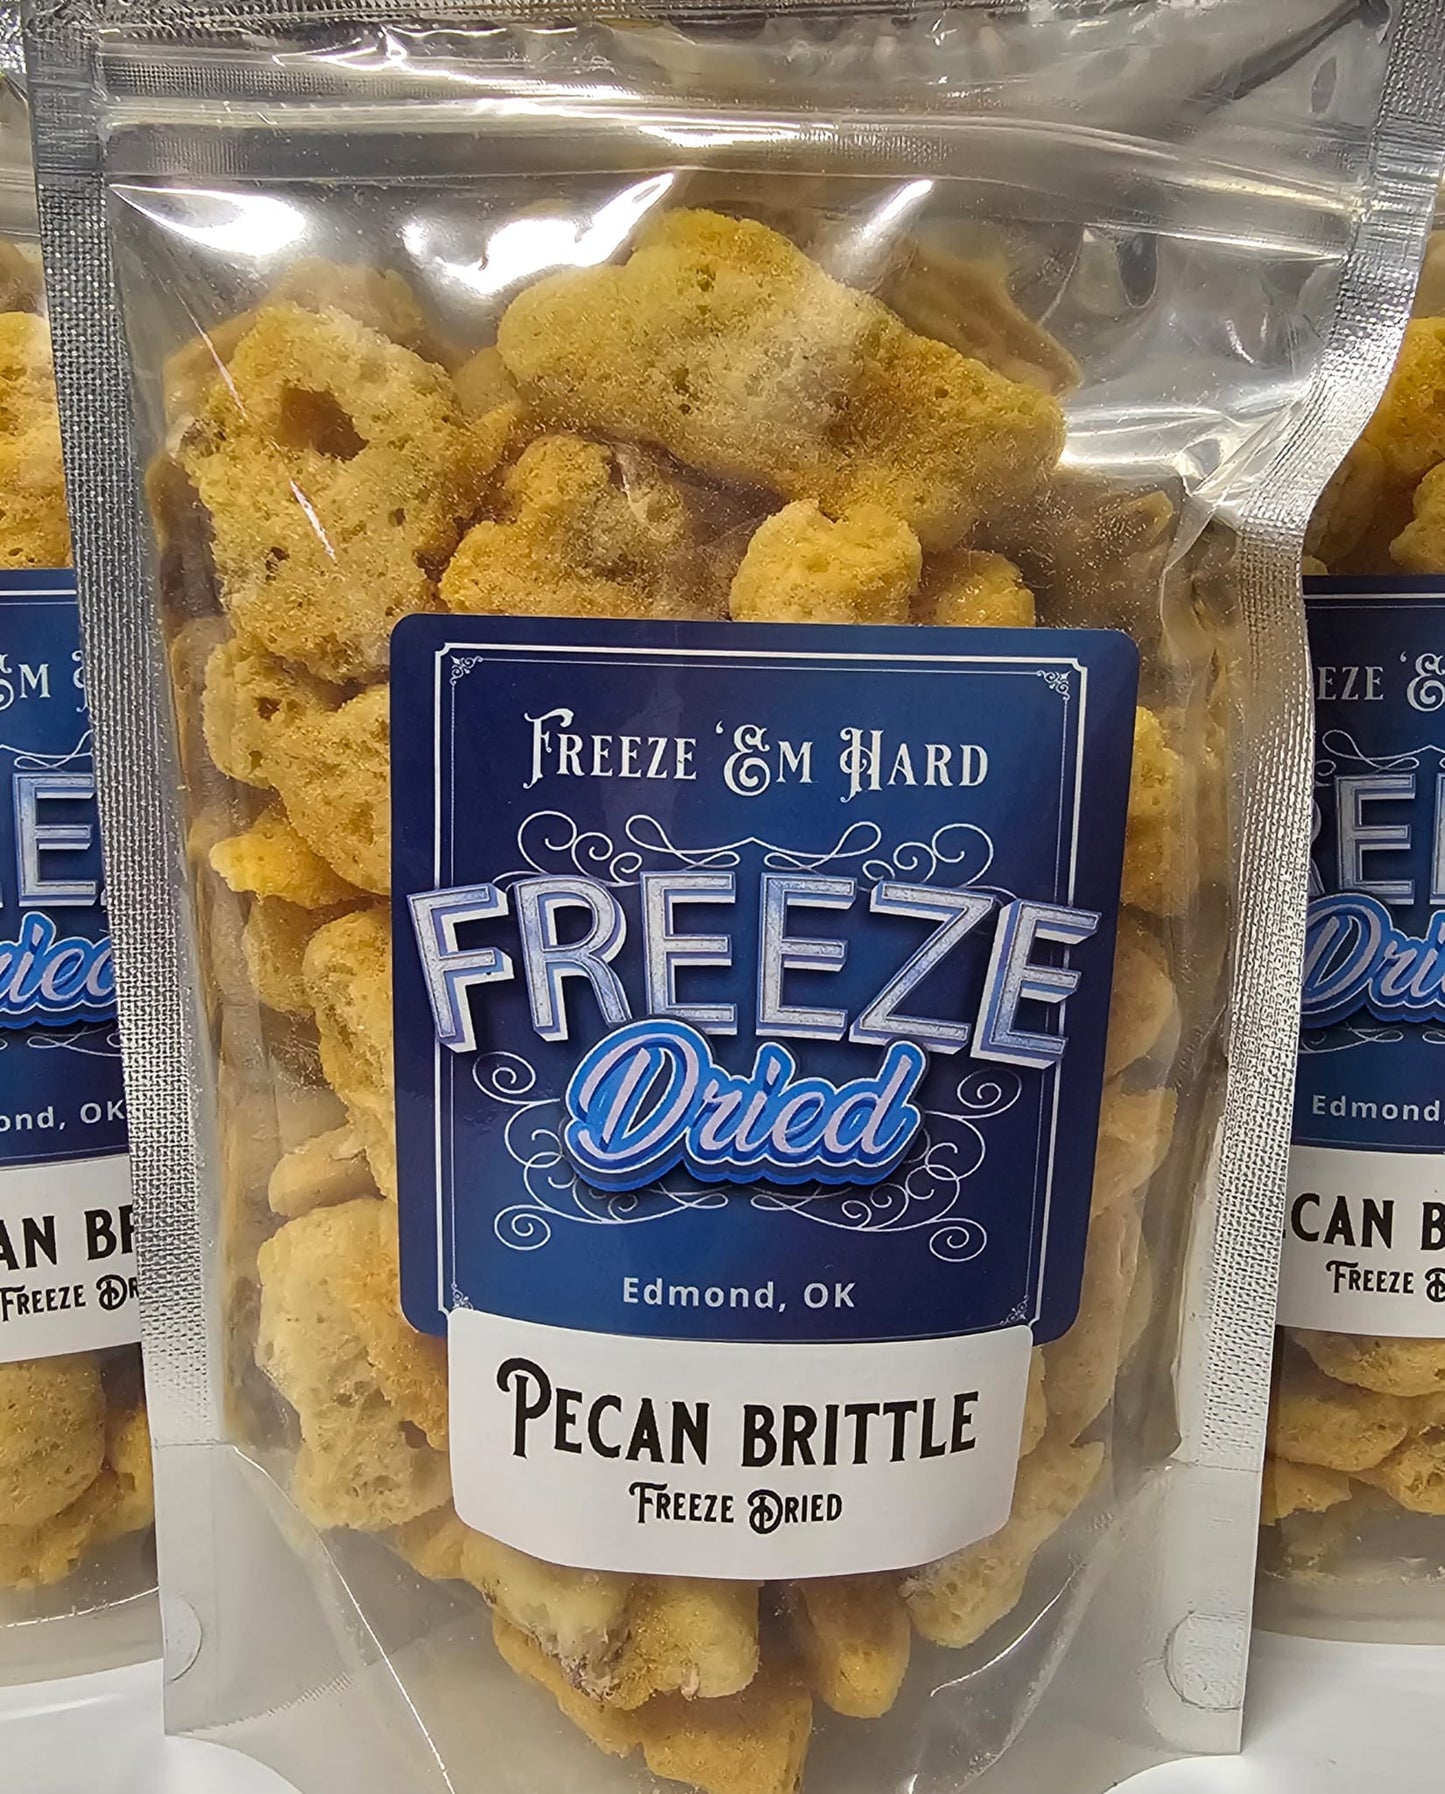 Freeze Dried PECAN BRITTLE PUFFS by Dutch Addictions - Large 6x9 bag